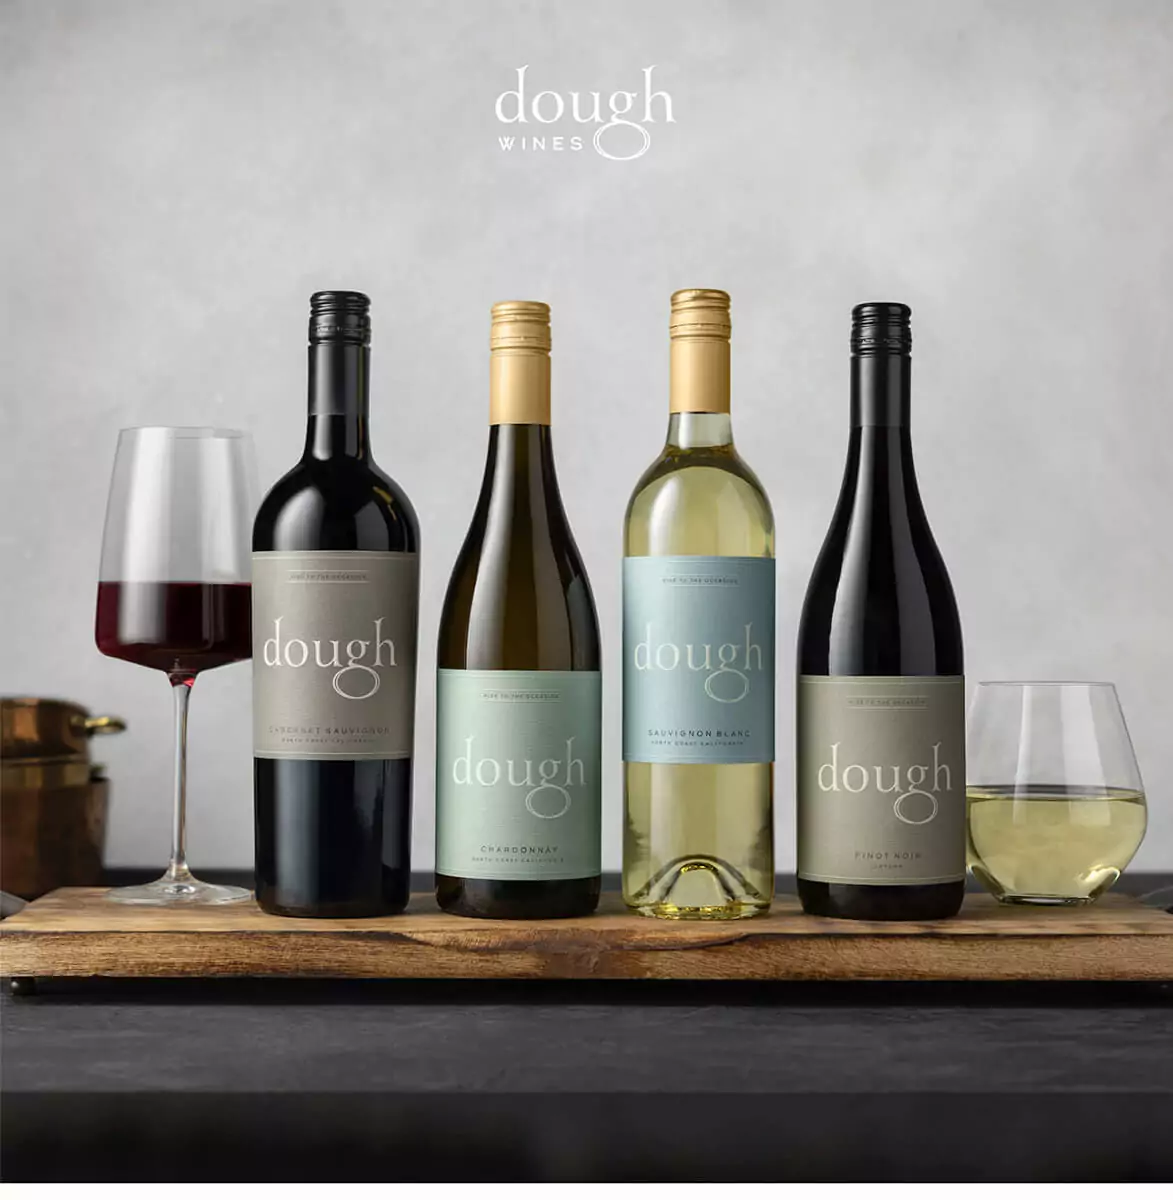 Distinguished Vineyards launches Dough Wines with 